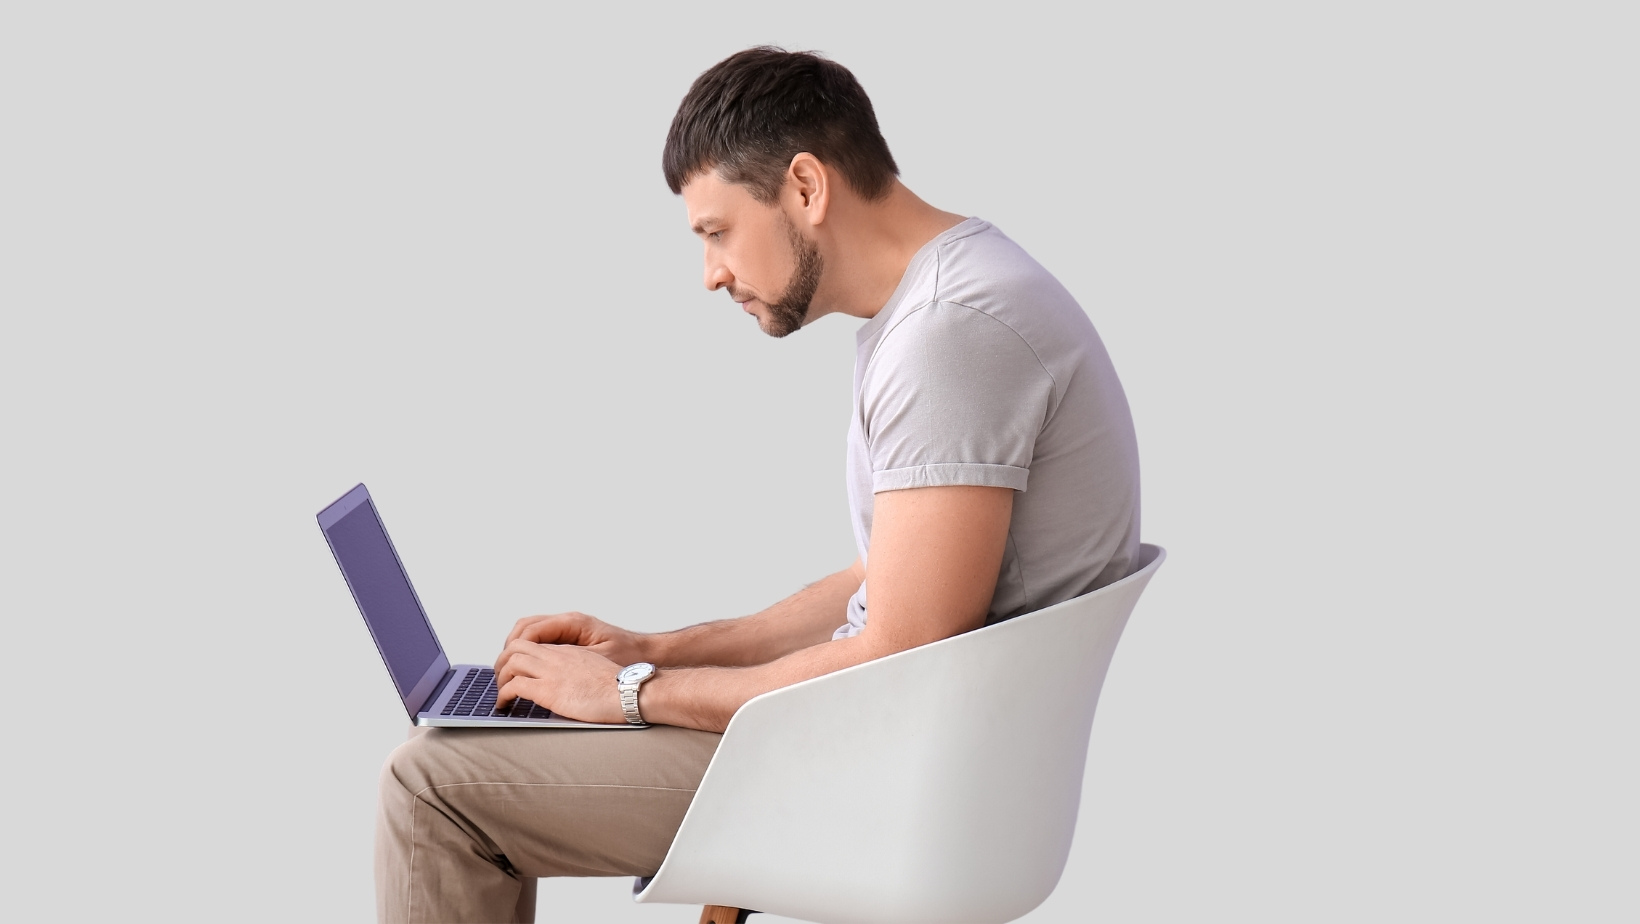 Featured image for the How Chiropractic care will improve my posture flexibility and range of motion article. A man is sitting on a chair, centred in frame, facing the left. He has a laptop placed on his legs, and he is focused on the screen.